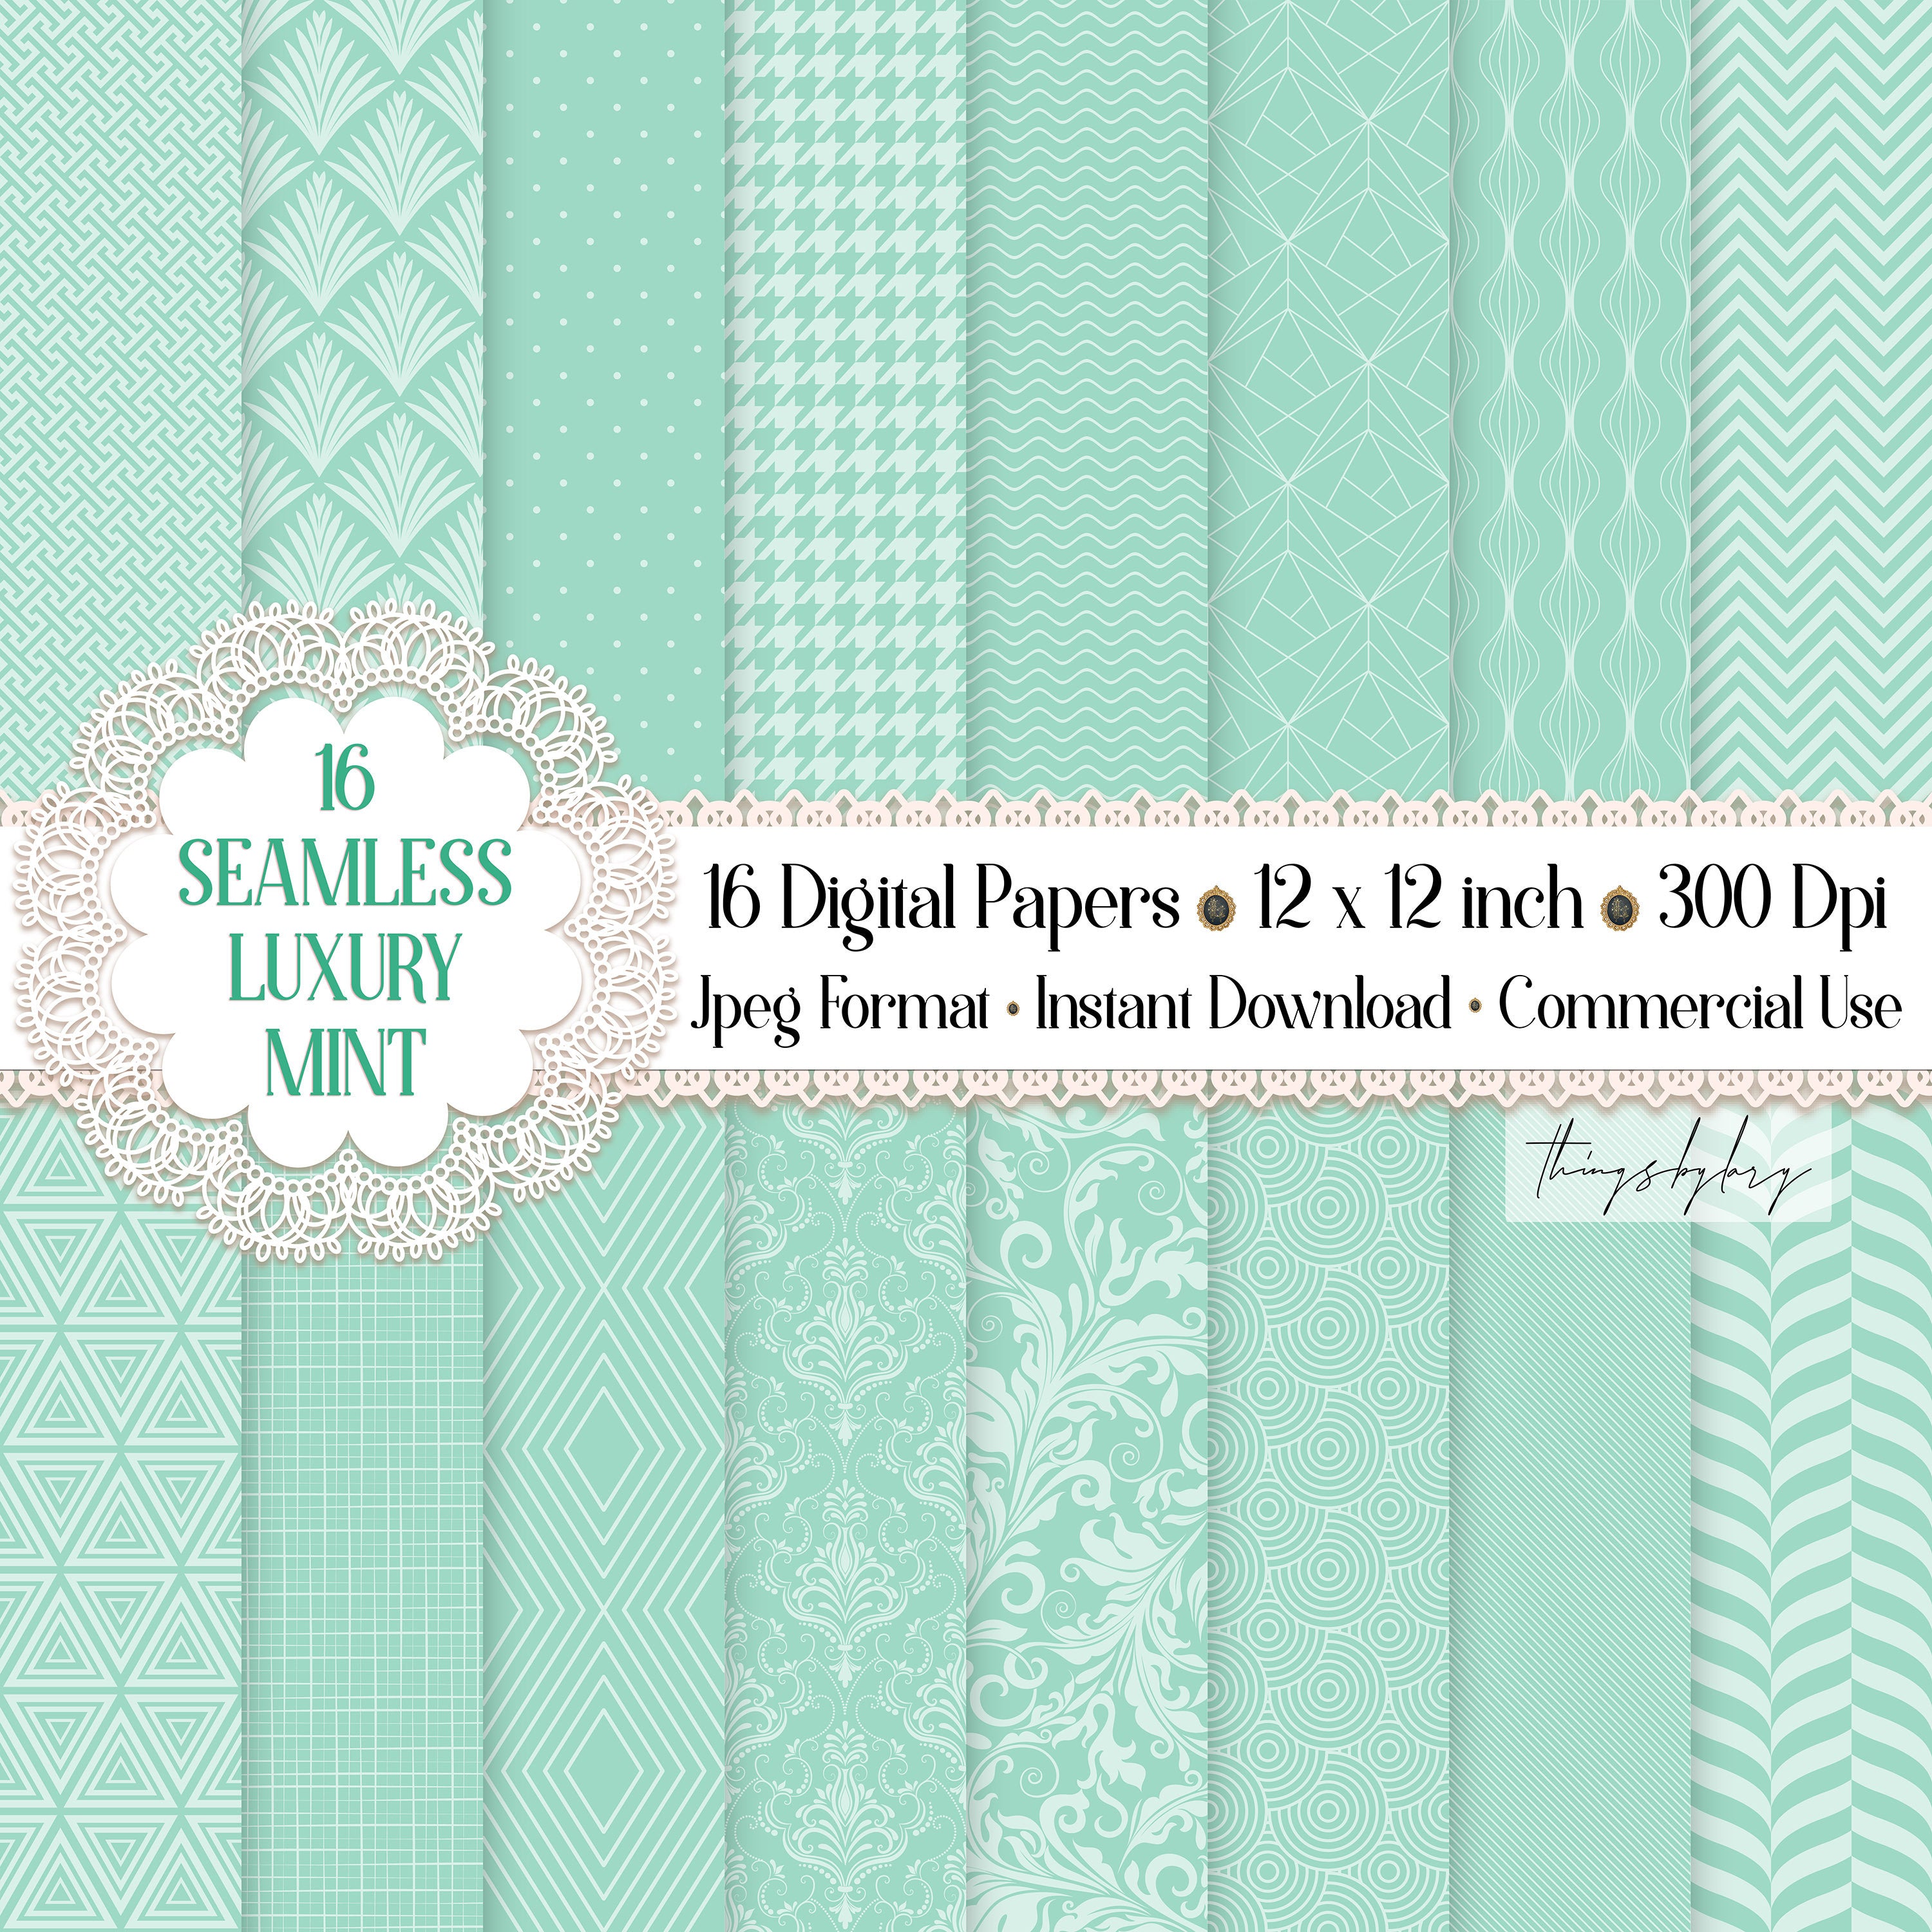 16 Seamless Luxury Mint Digital Papers 300 dpi commercial use damask art deco houndstooth pastel paper herringbone shabby chic mint wedding